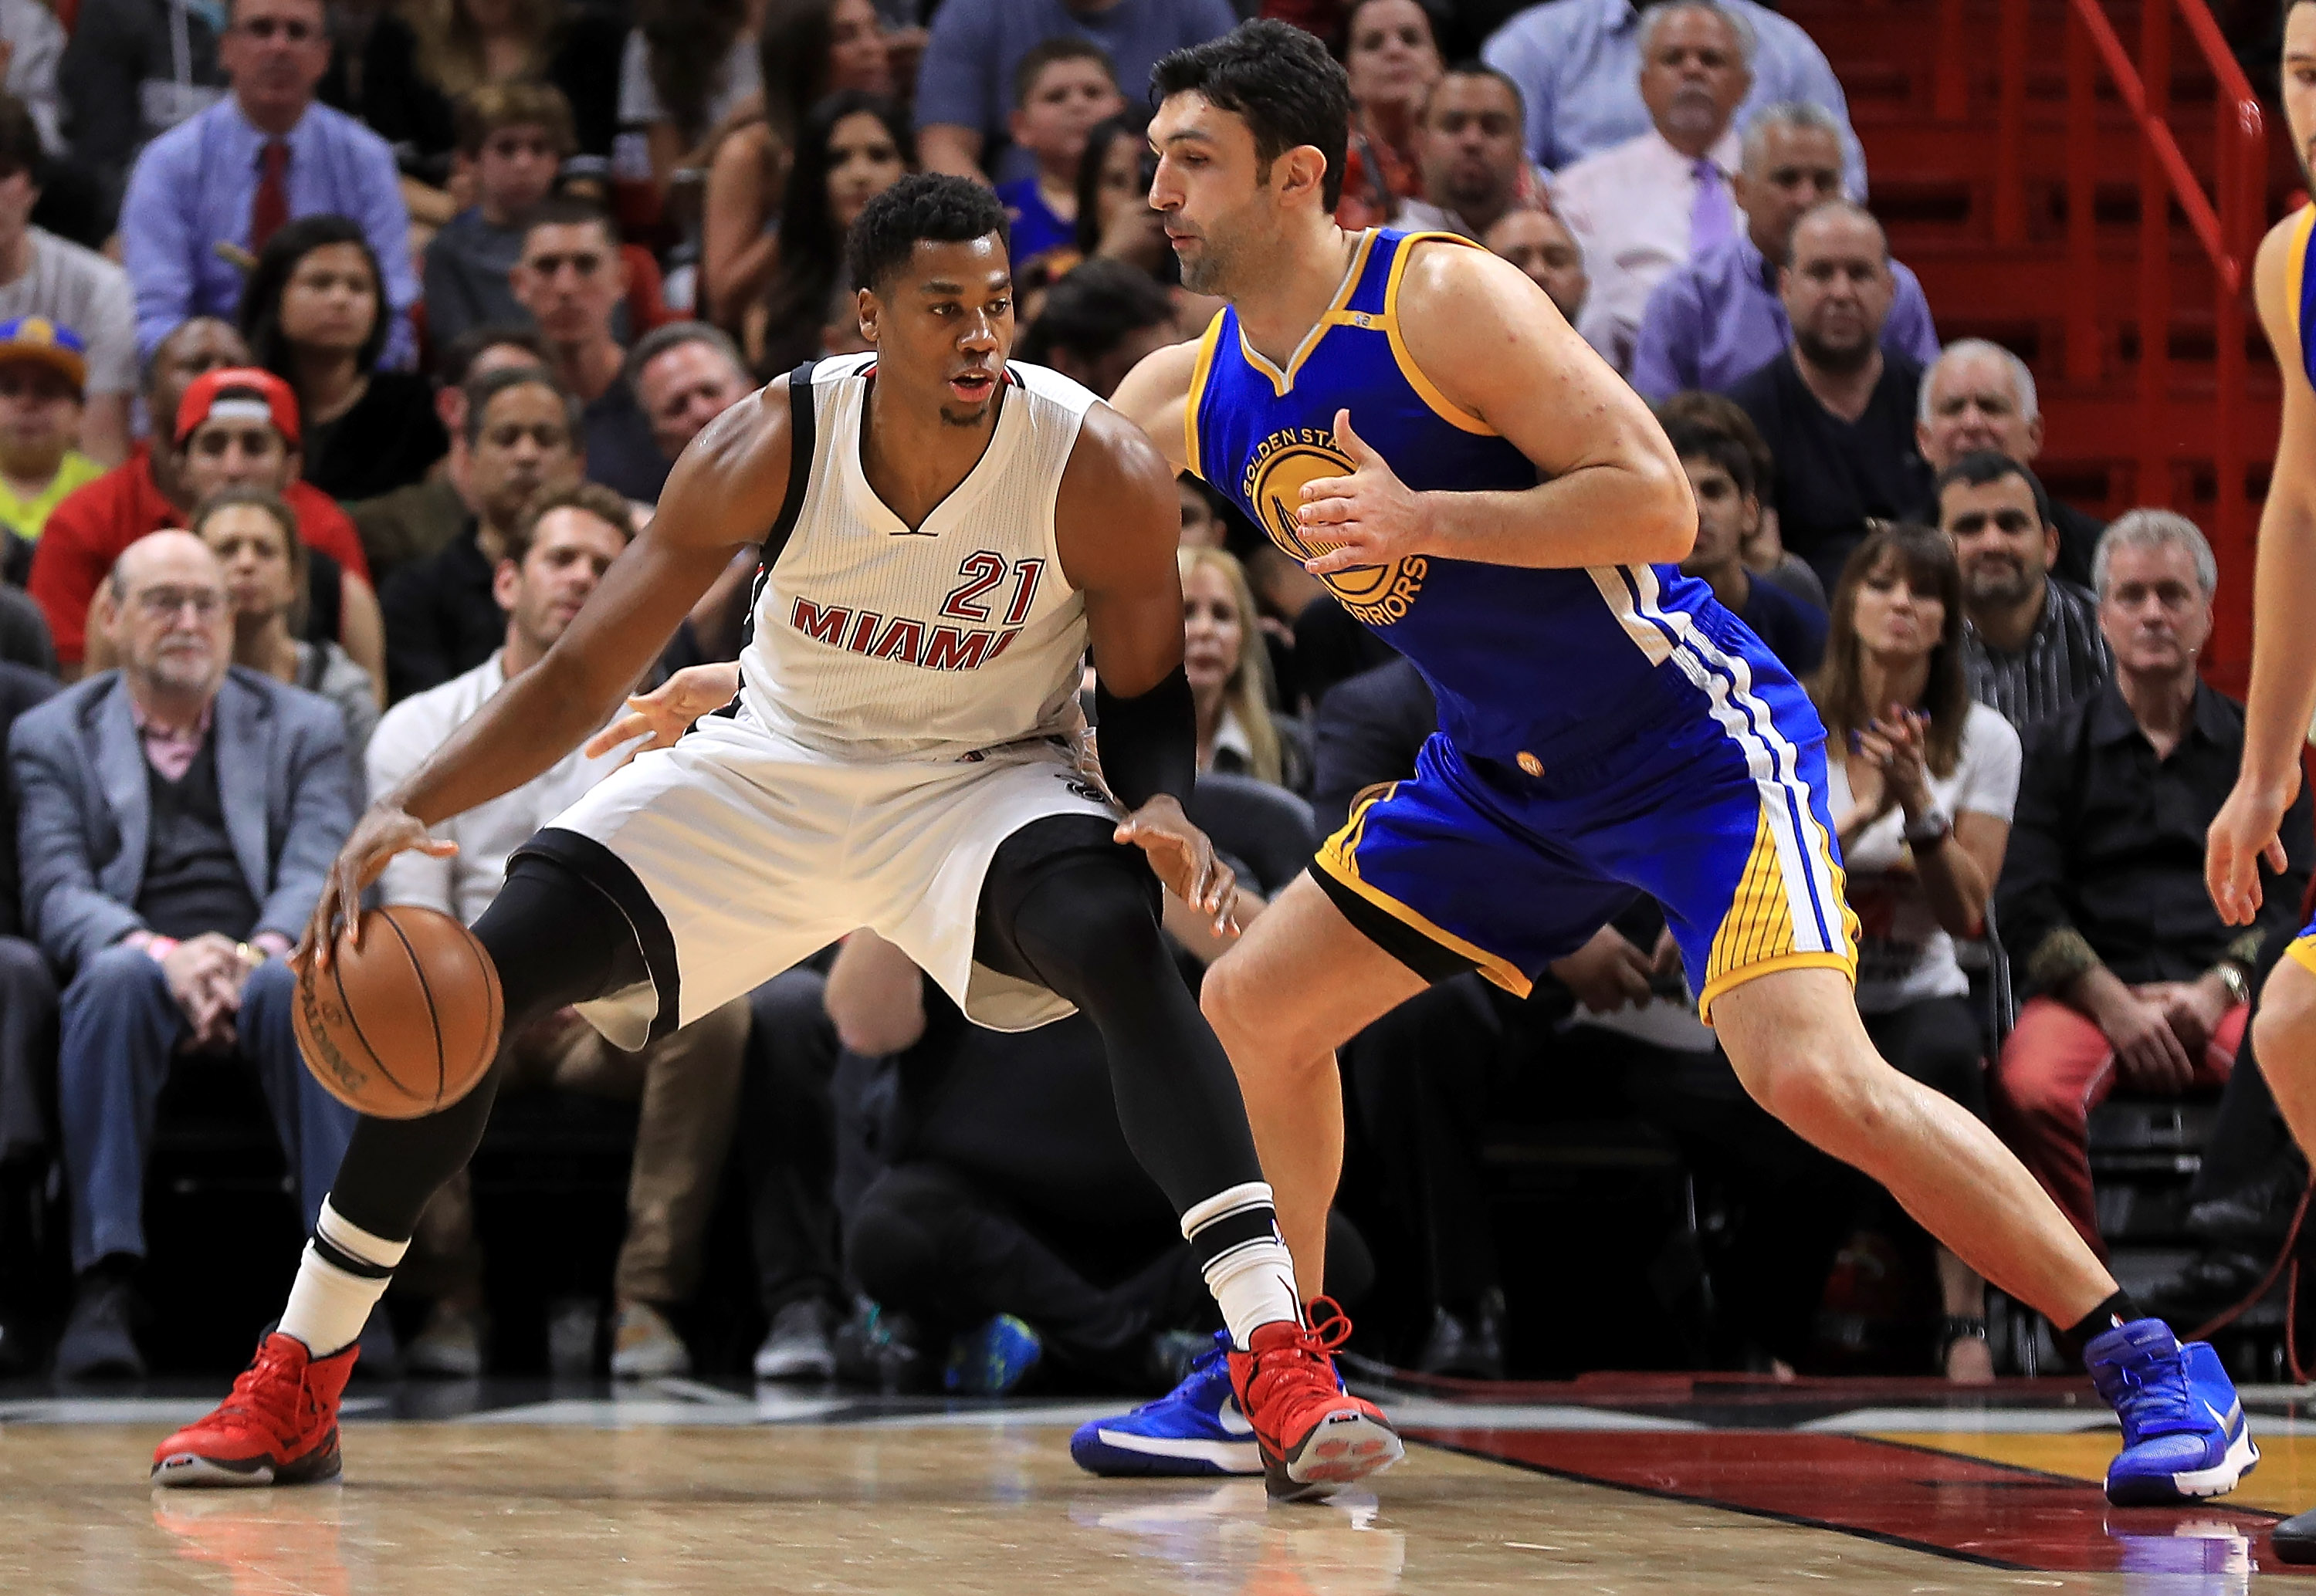 MIAMI, FL - JANUARY 23: Hassan Whiteside #21 of the Miami Heat posts up Zaza Pachulia #27 of the Golden State Warriors during a game at American Airlines Arena on January 23, 2017 in Miami, Florida. NOTE TO USER: User expressly acknowledges and agrees that, by downloading and or using this photograph, User is consenting to the terms and conditions of the Getty Images License Agreement.   Mike Ehrmann/Getty Images/AFP